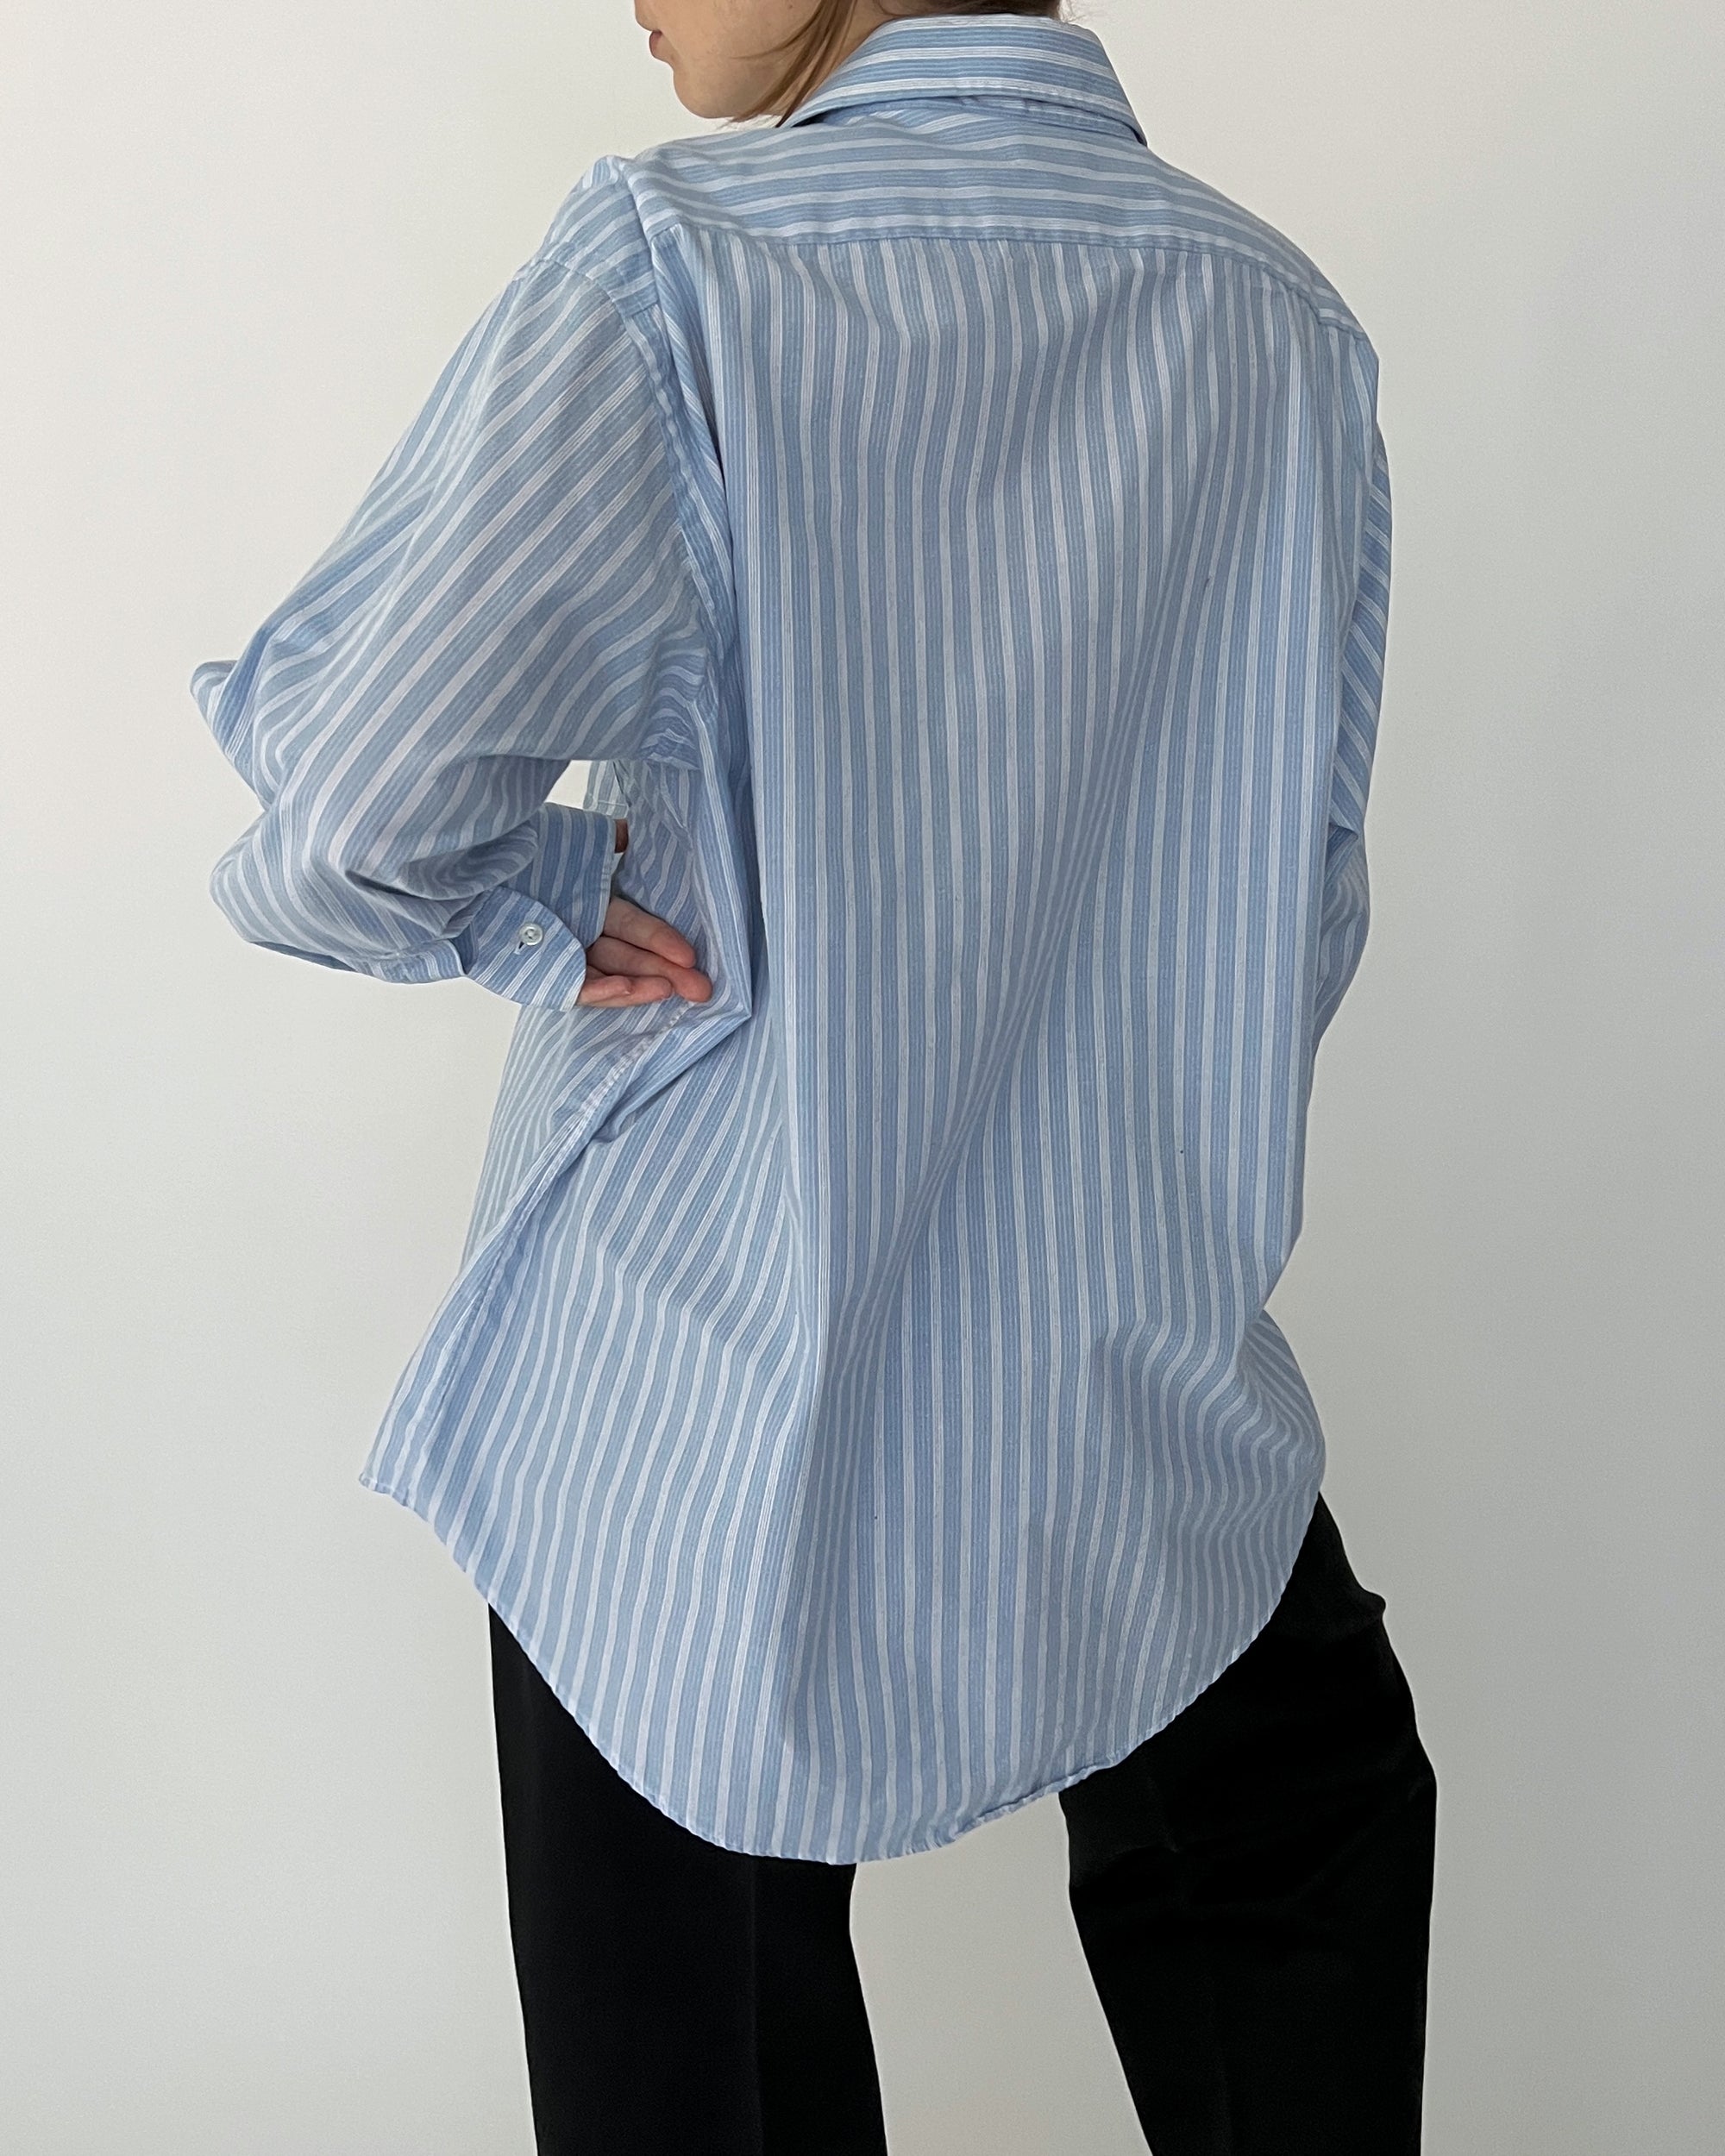 Vintage Christian Dior Sky Striped Button Up